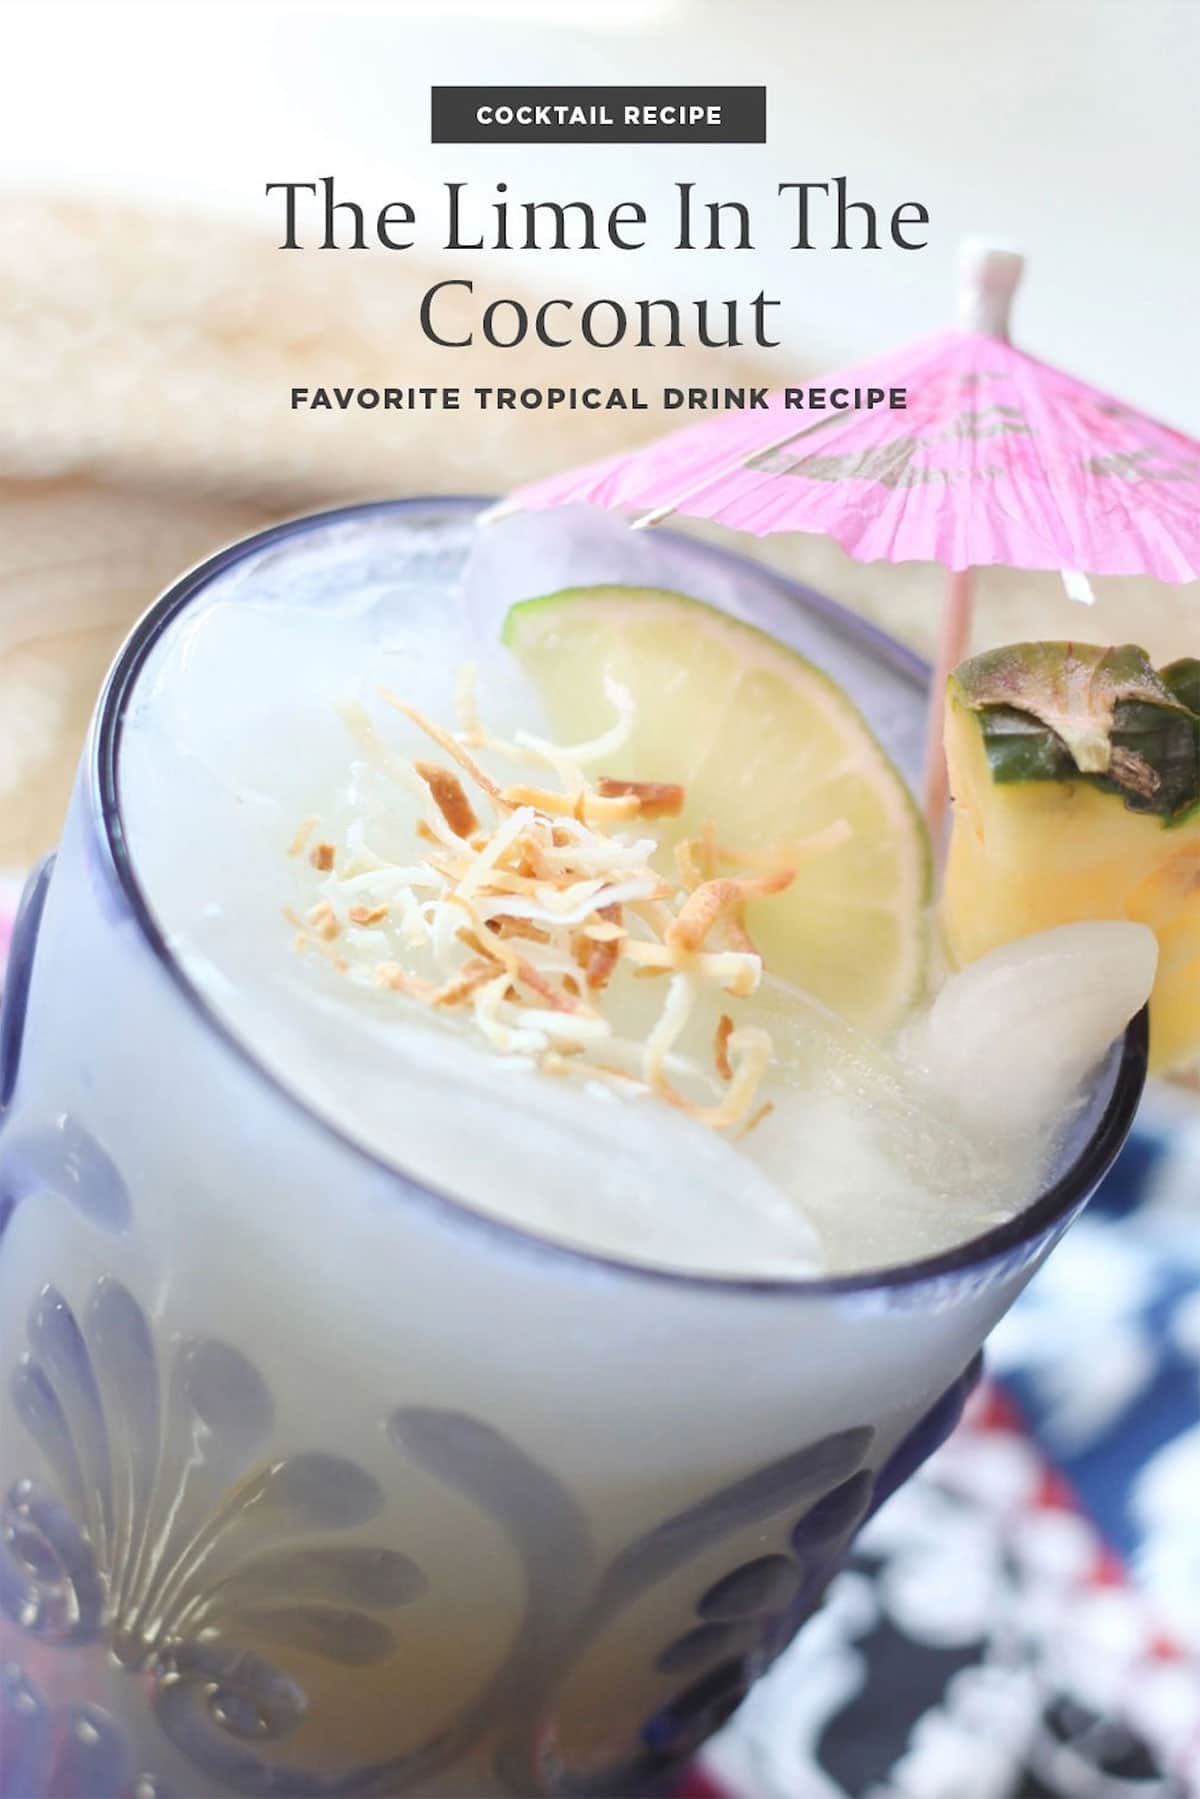 Best Lime In The Coconut Drink Recipe - If you're looking for the best Lime In The Coconut cocktail recipe you've come to the right spot. Get the ingredients here to mix one up yourself.